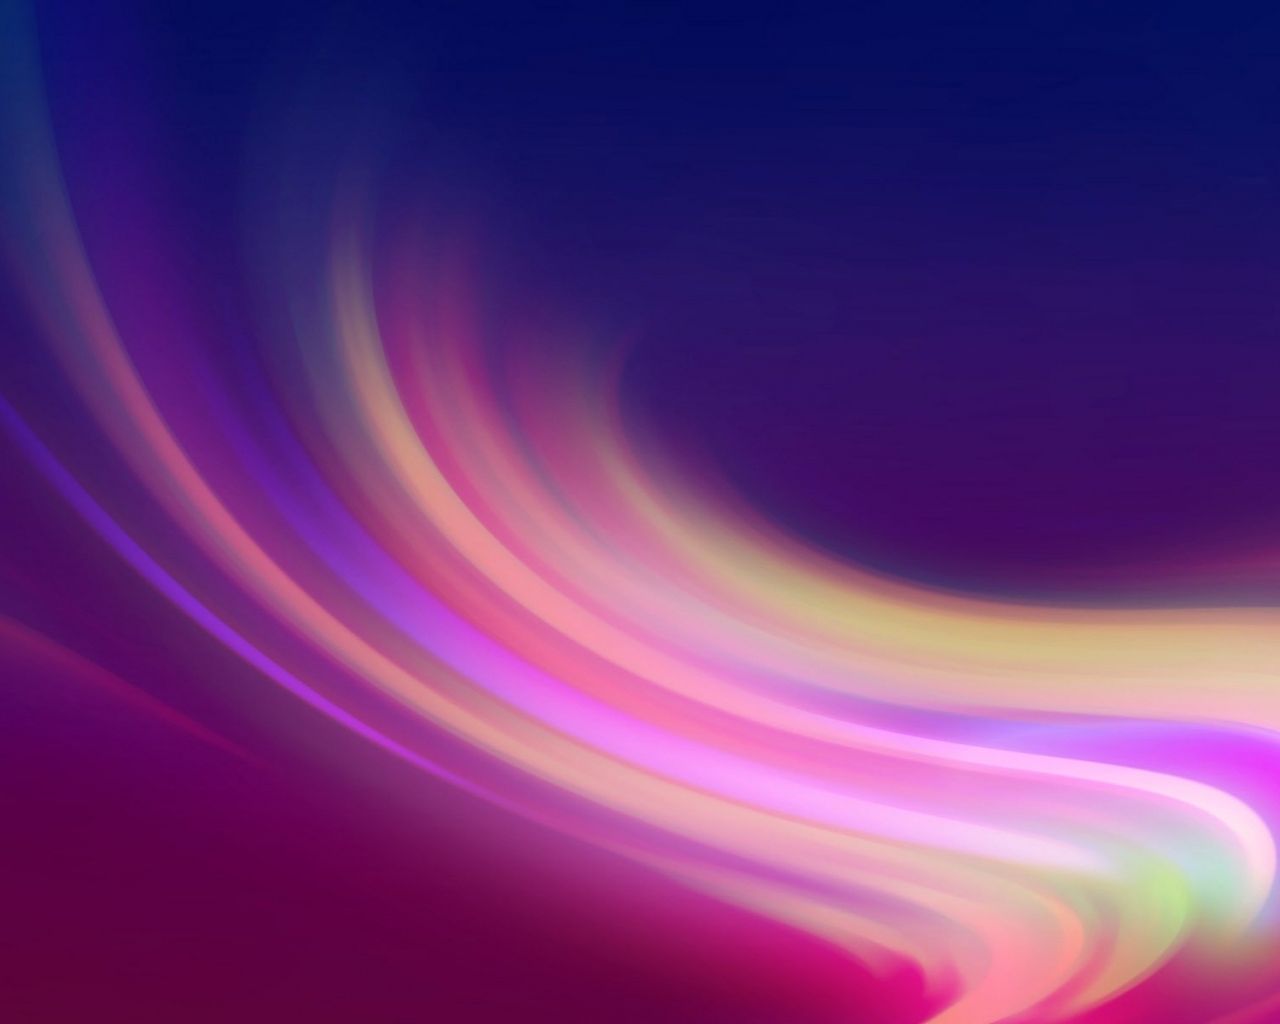 Abstract purple and pink waves wallpaper in 3D   Abstract wallpapers